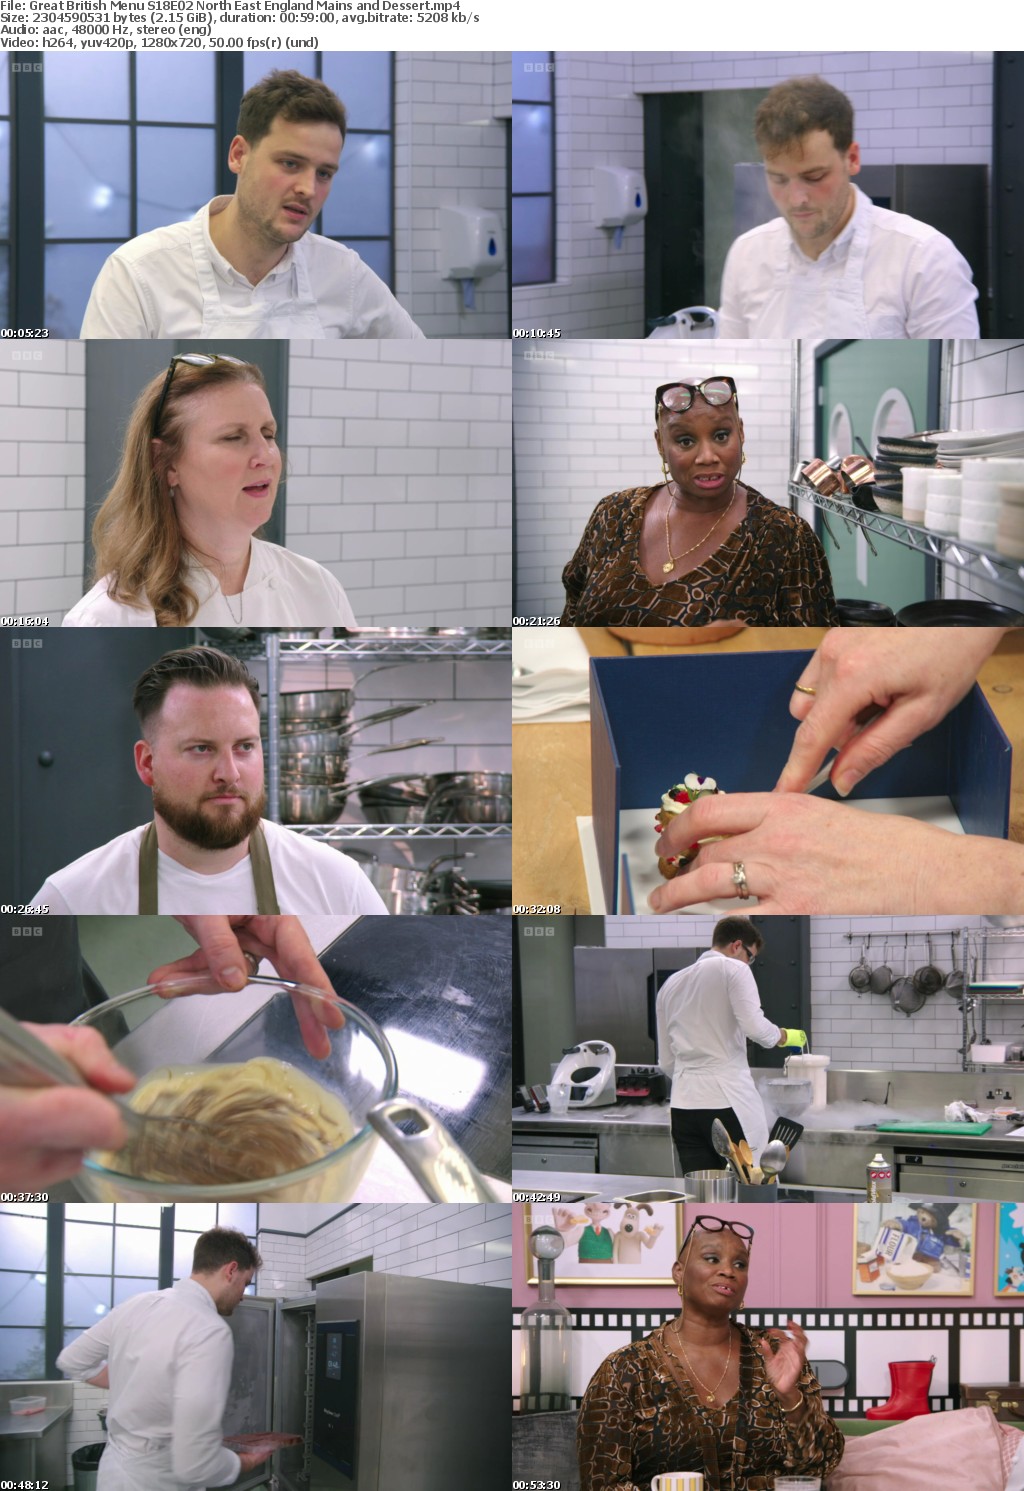 Great British Menu S18E02 North East England Mains and Dessert (1280x720p HD, 50fps, soft Eng subs)